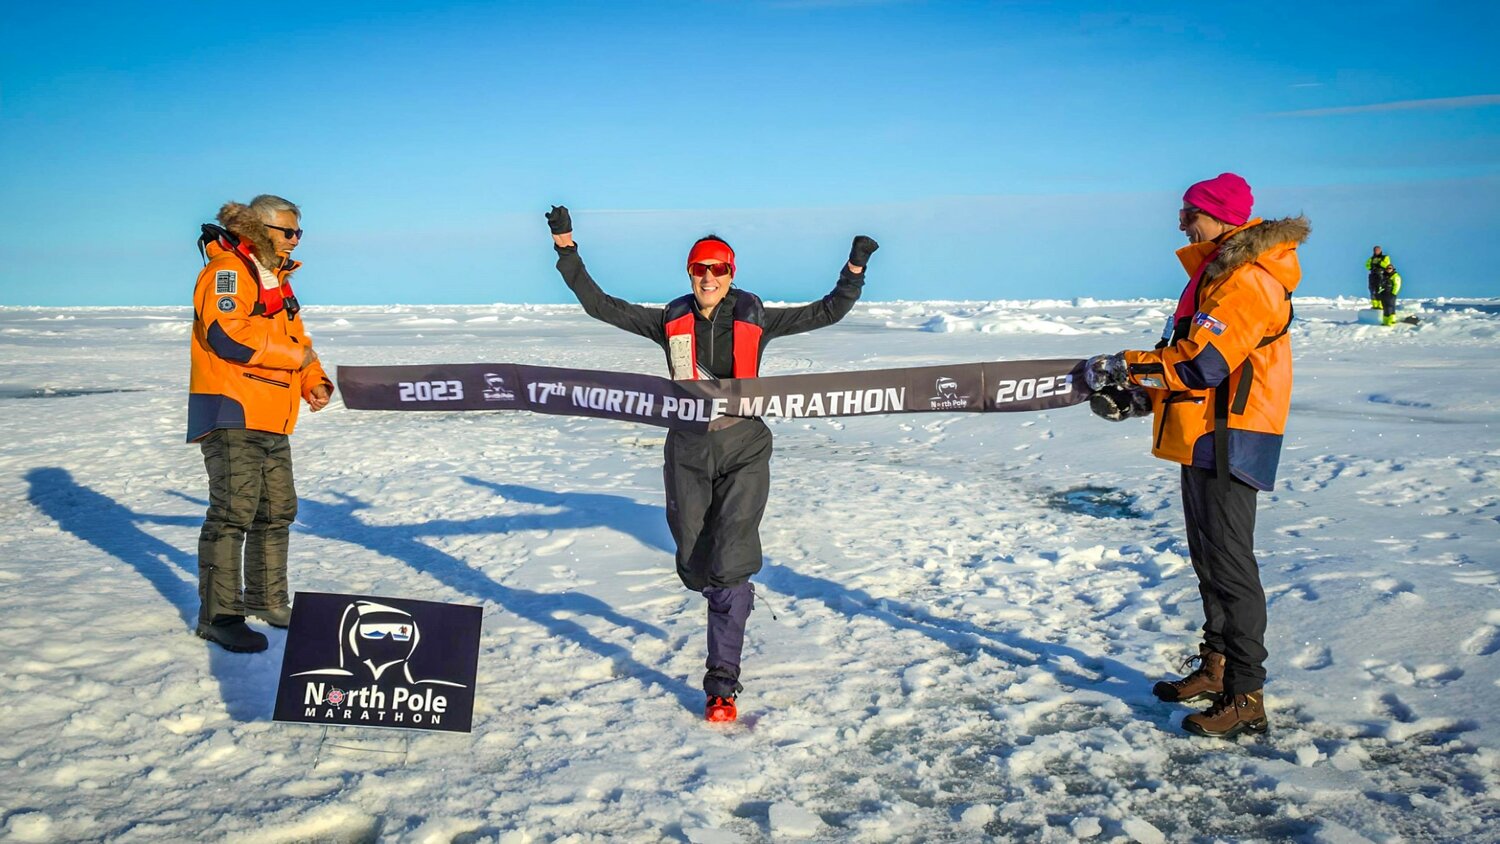 Paradise Valley resident Melissa Kullander completed the North Pole Marathon Aug. 16, as the first-place woman and first American to do so.